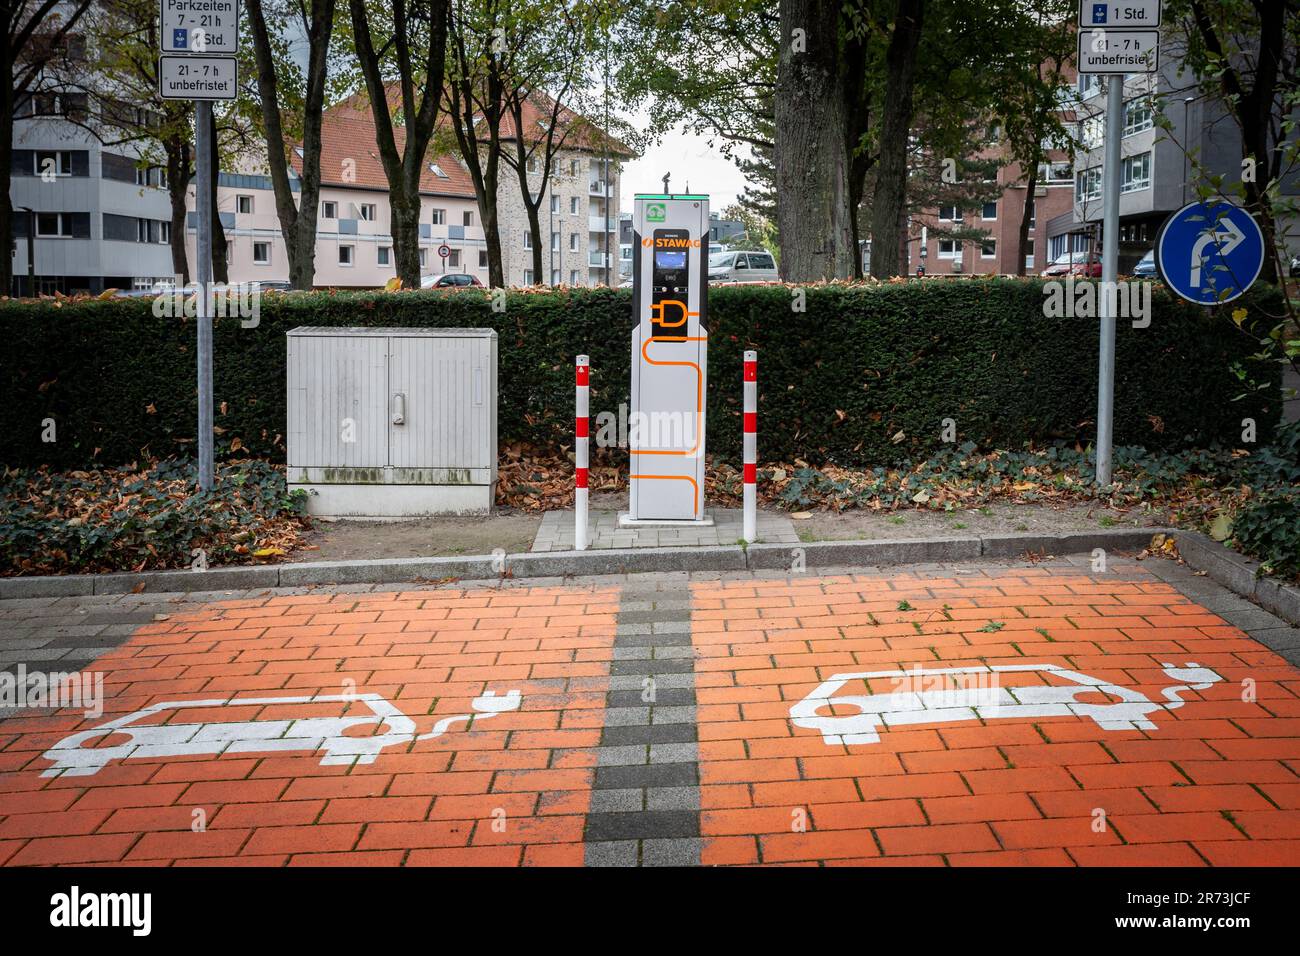 Picture of a German e-charger, an electric car charging station facility in the city center of Aachen, Germany, with the logo of Stawag. Stadtwerke Aa Stock Photo